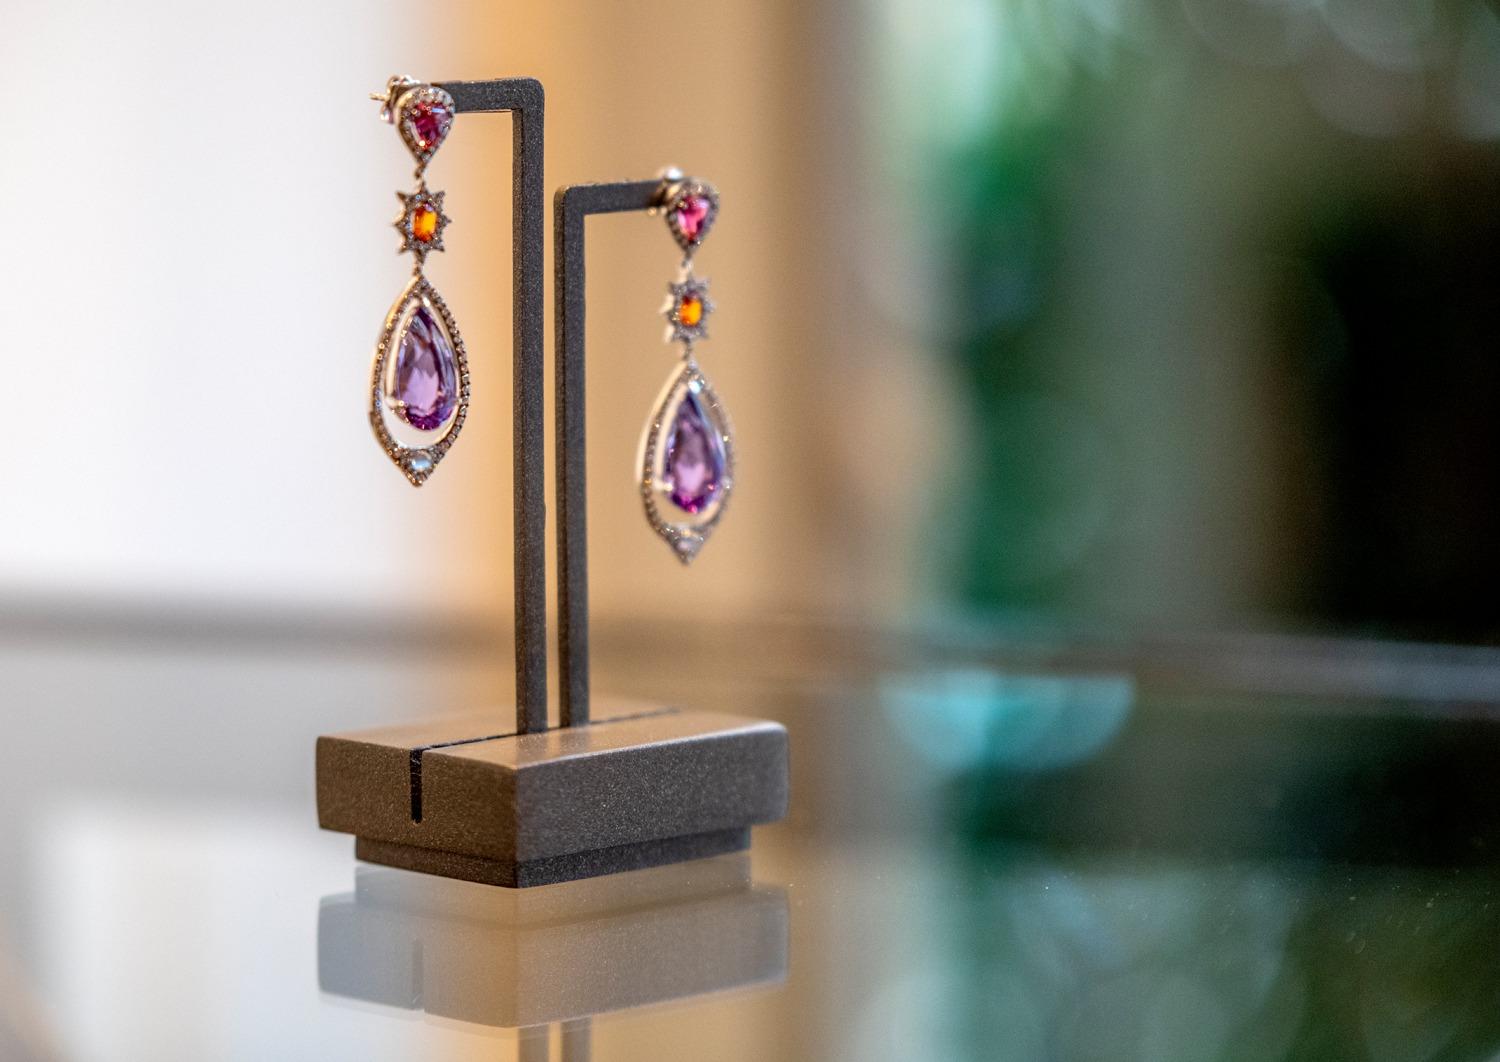 This is the ultimate night out accessory, they are light, fancy earrings that make a statement but are also fun. 
Bochic Candy Drop Gems:
Amethyst Pear shaped drops 
Mandarin garnet Rounds 
Rublite triangle shaped Tops 
Moonstones 
Diamonds - F